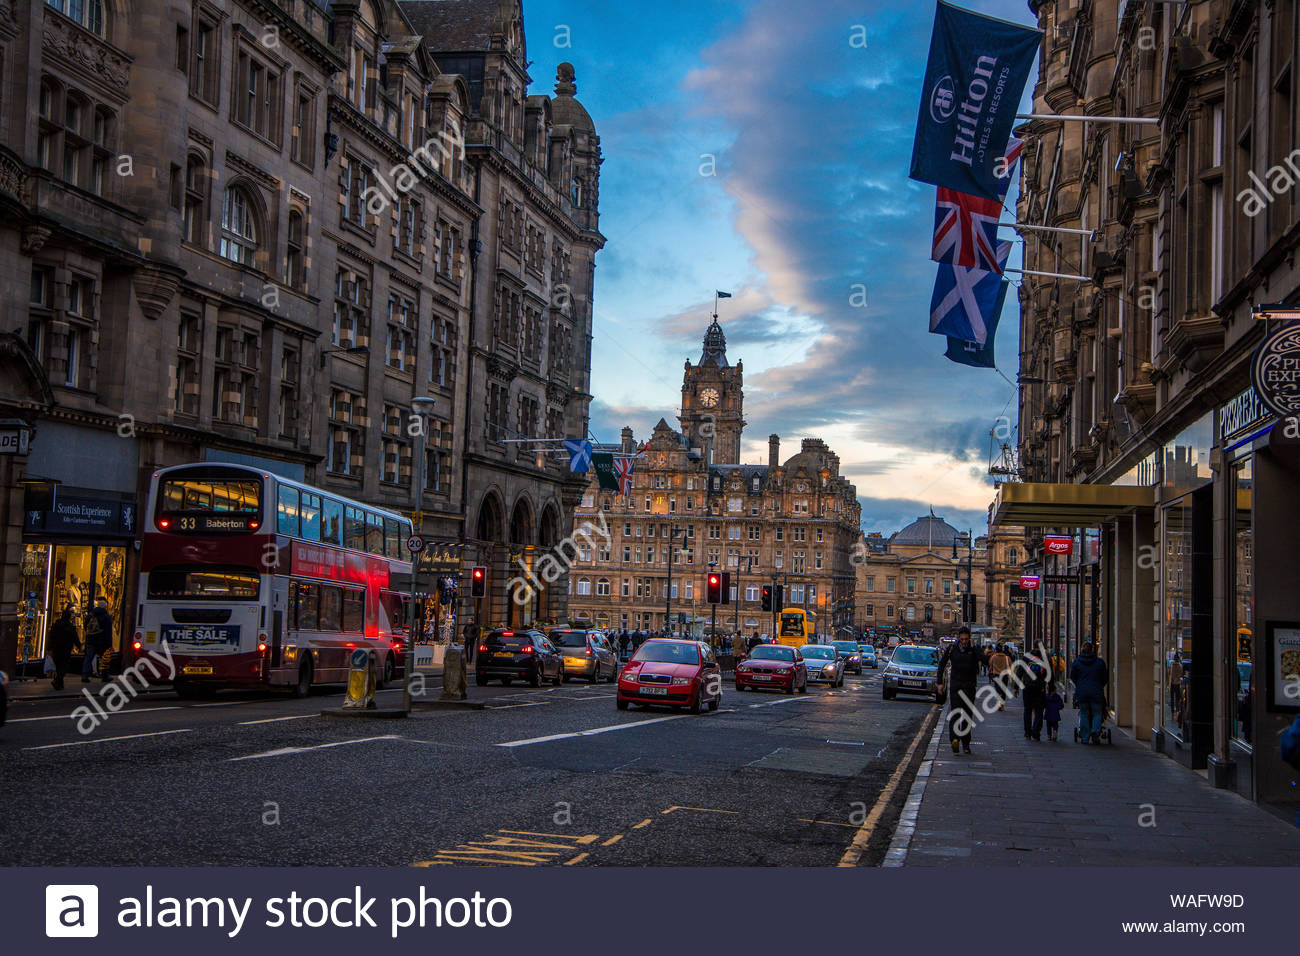 moody street scene of the royal mile edinburgh scotland uk showing hilton hotel old tall buildings shops cars buses and people plus flags WAFW9D